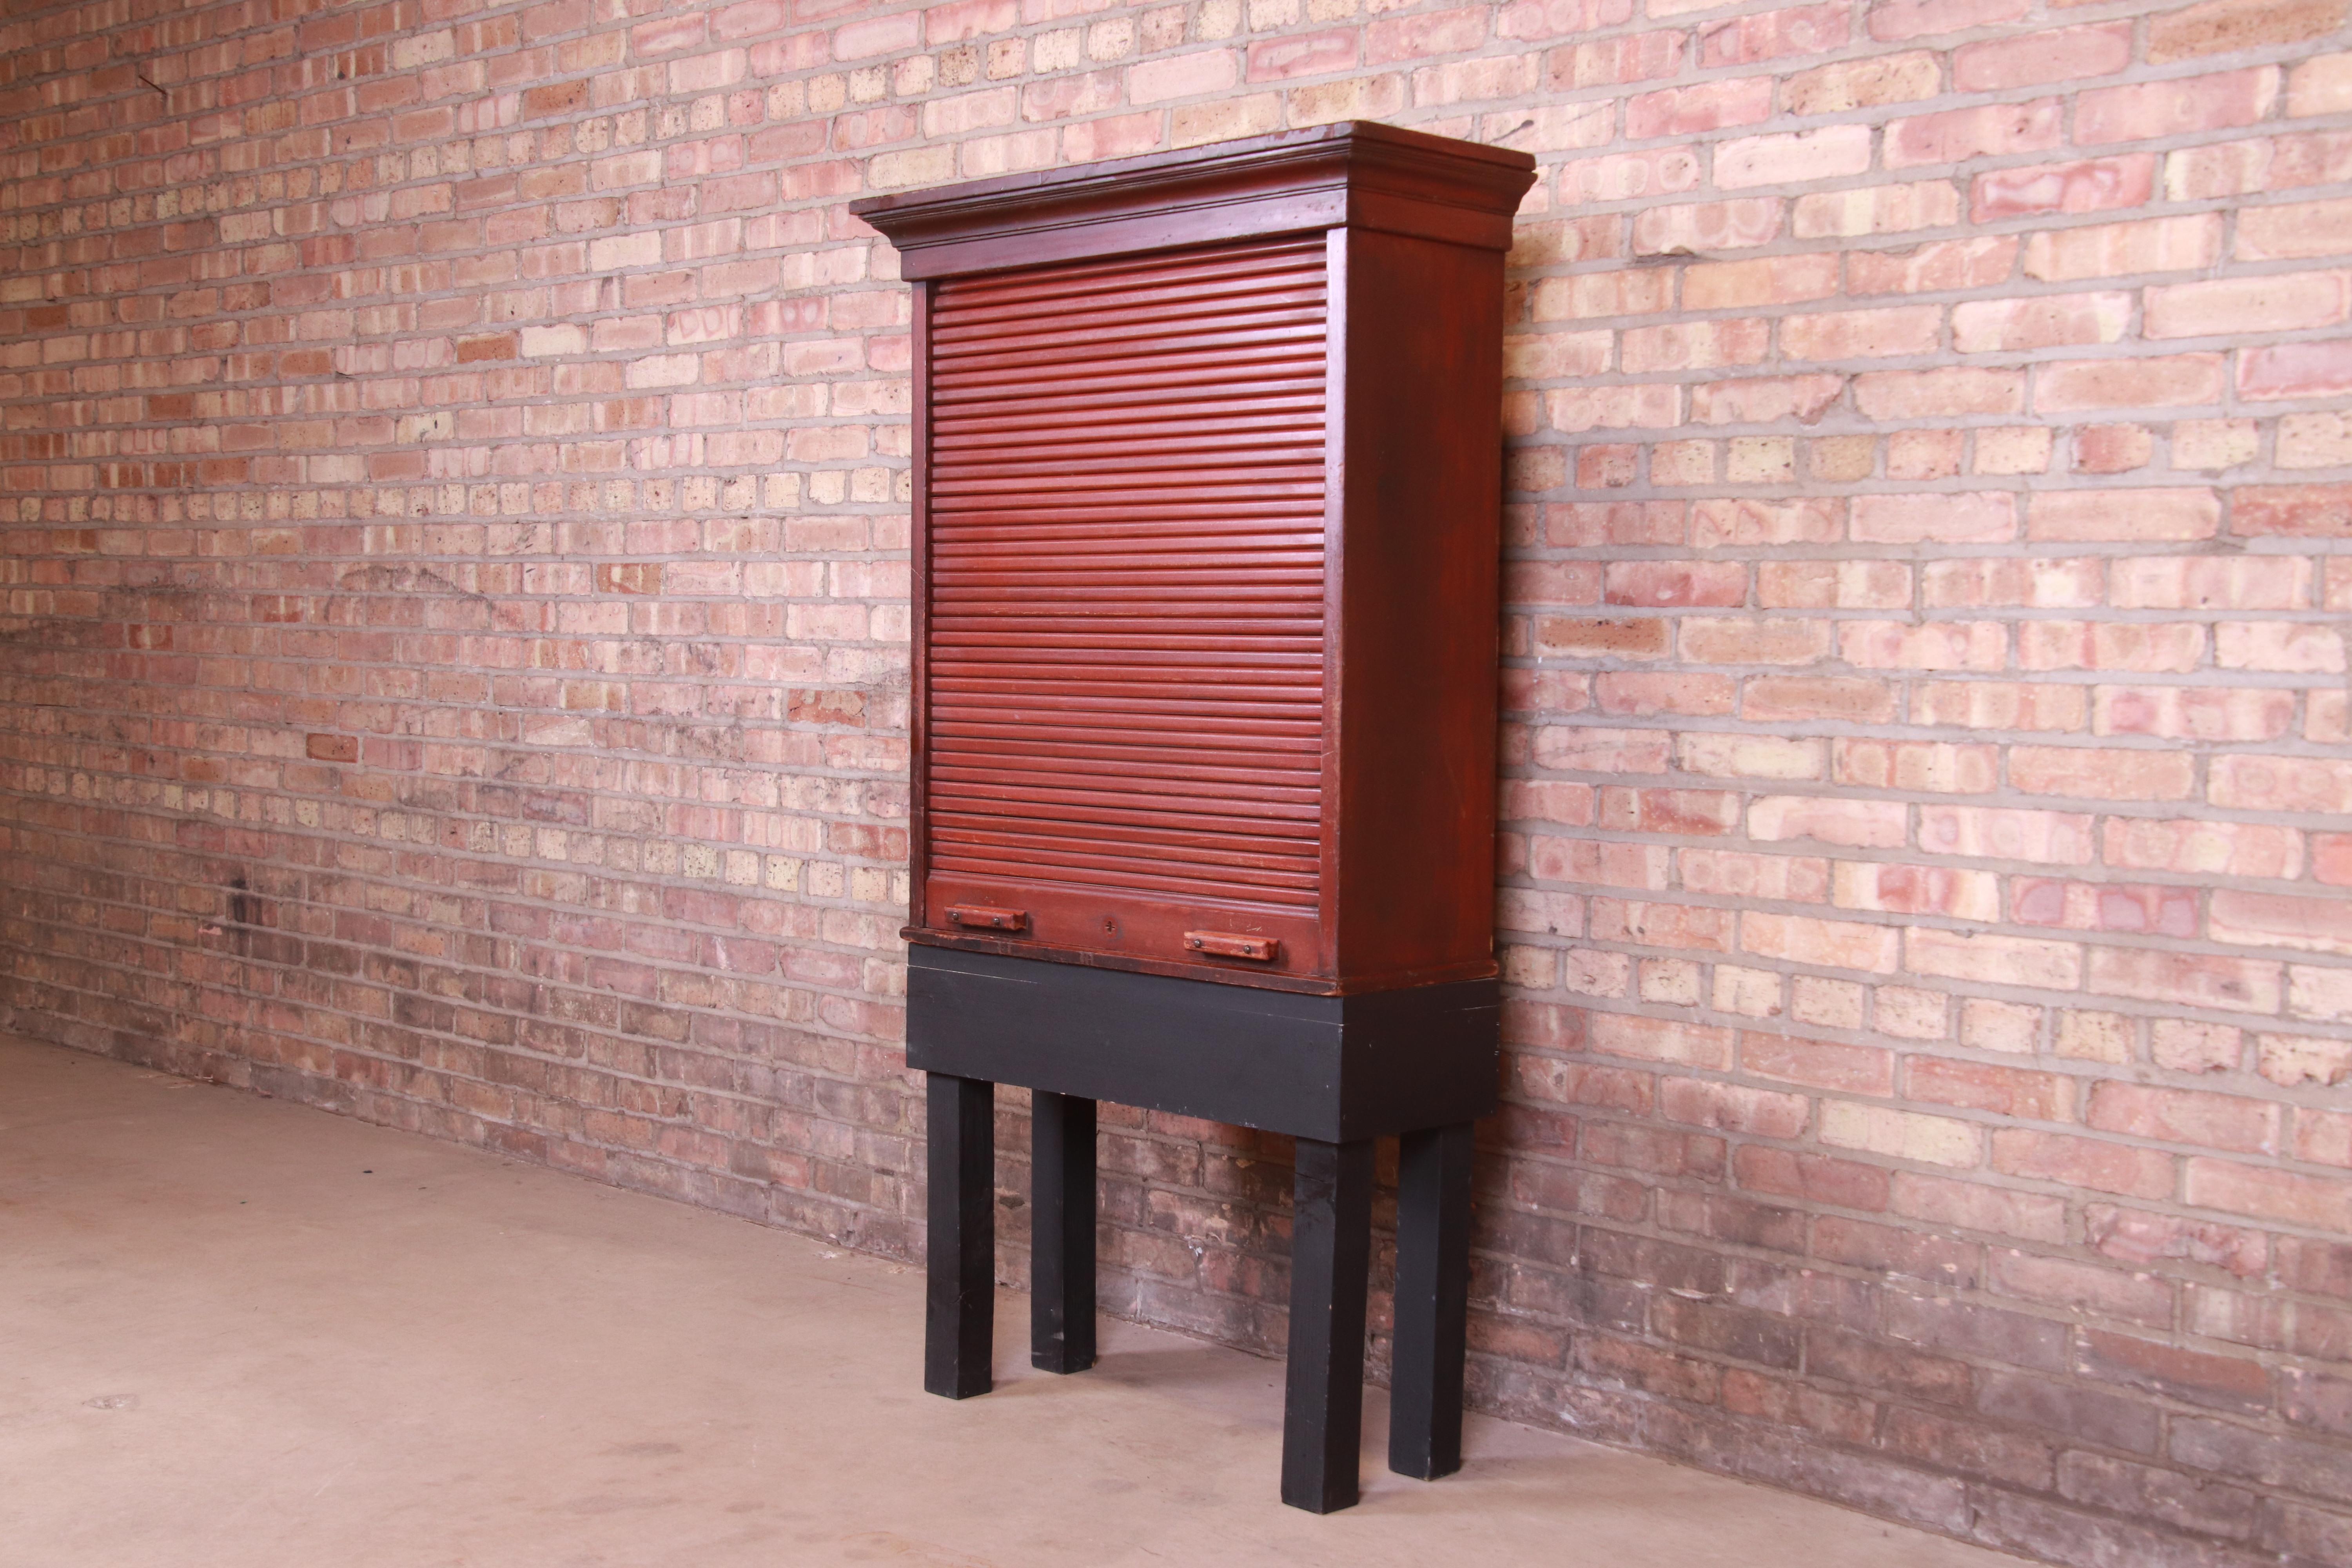 A unique Americana Folk Art railroad ticket cabinet with 92 cubbies,

USA, late 19th century

Mahogany, with roll down tambour door and black painted base.

Measures: 33